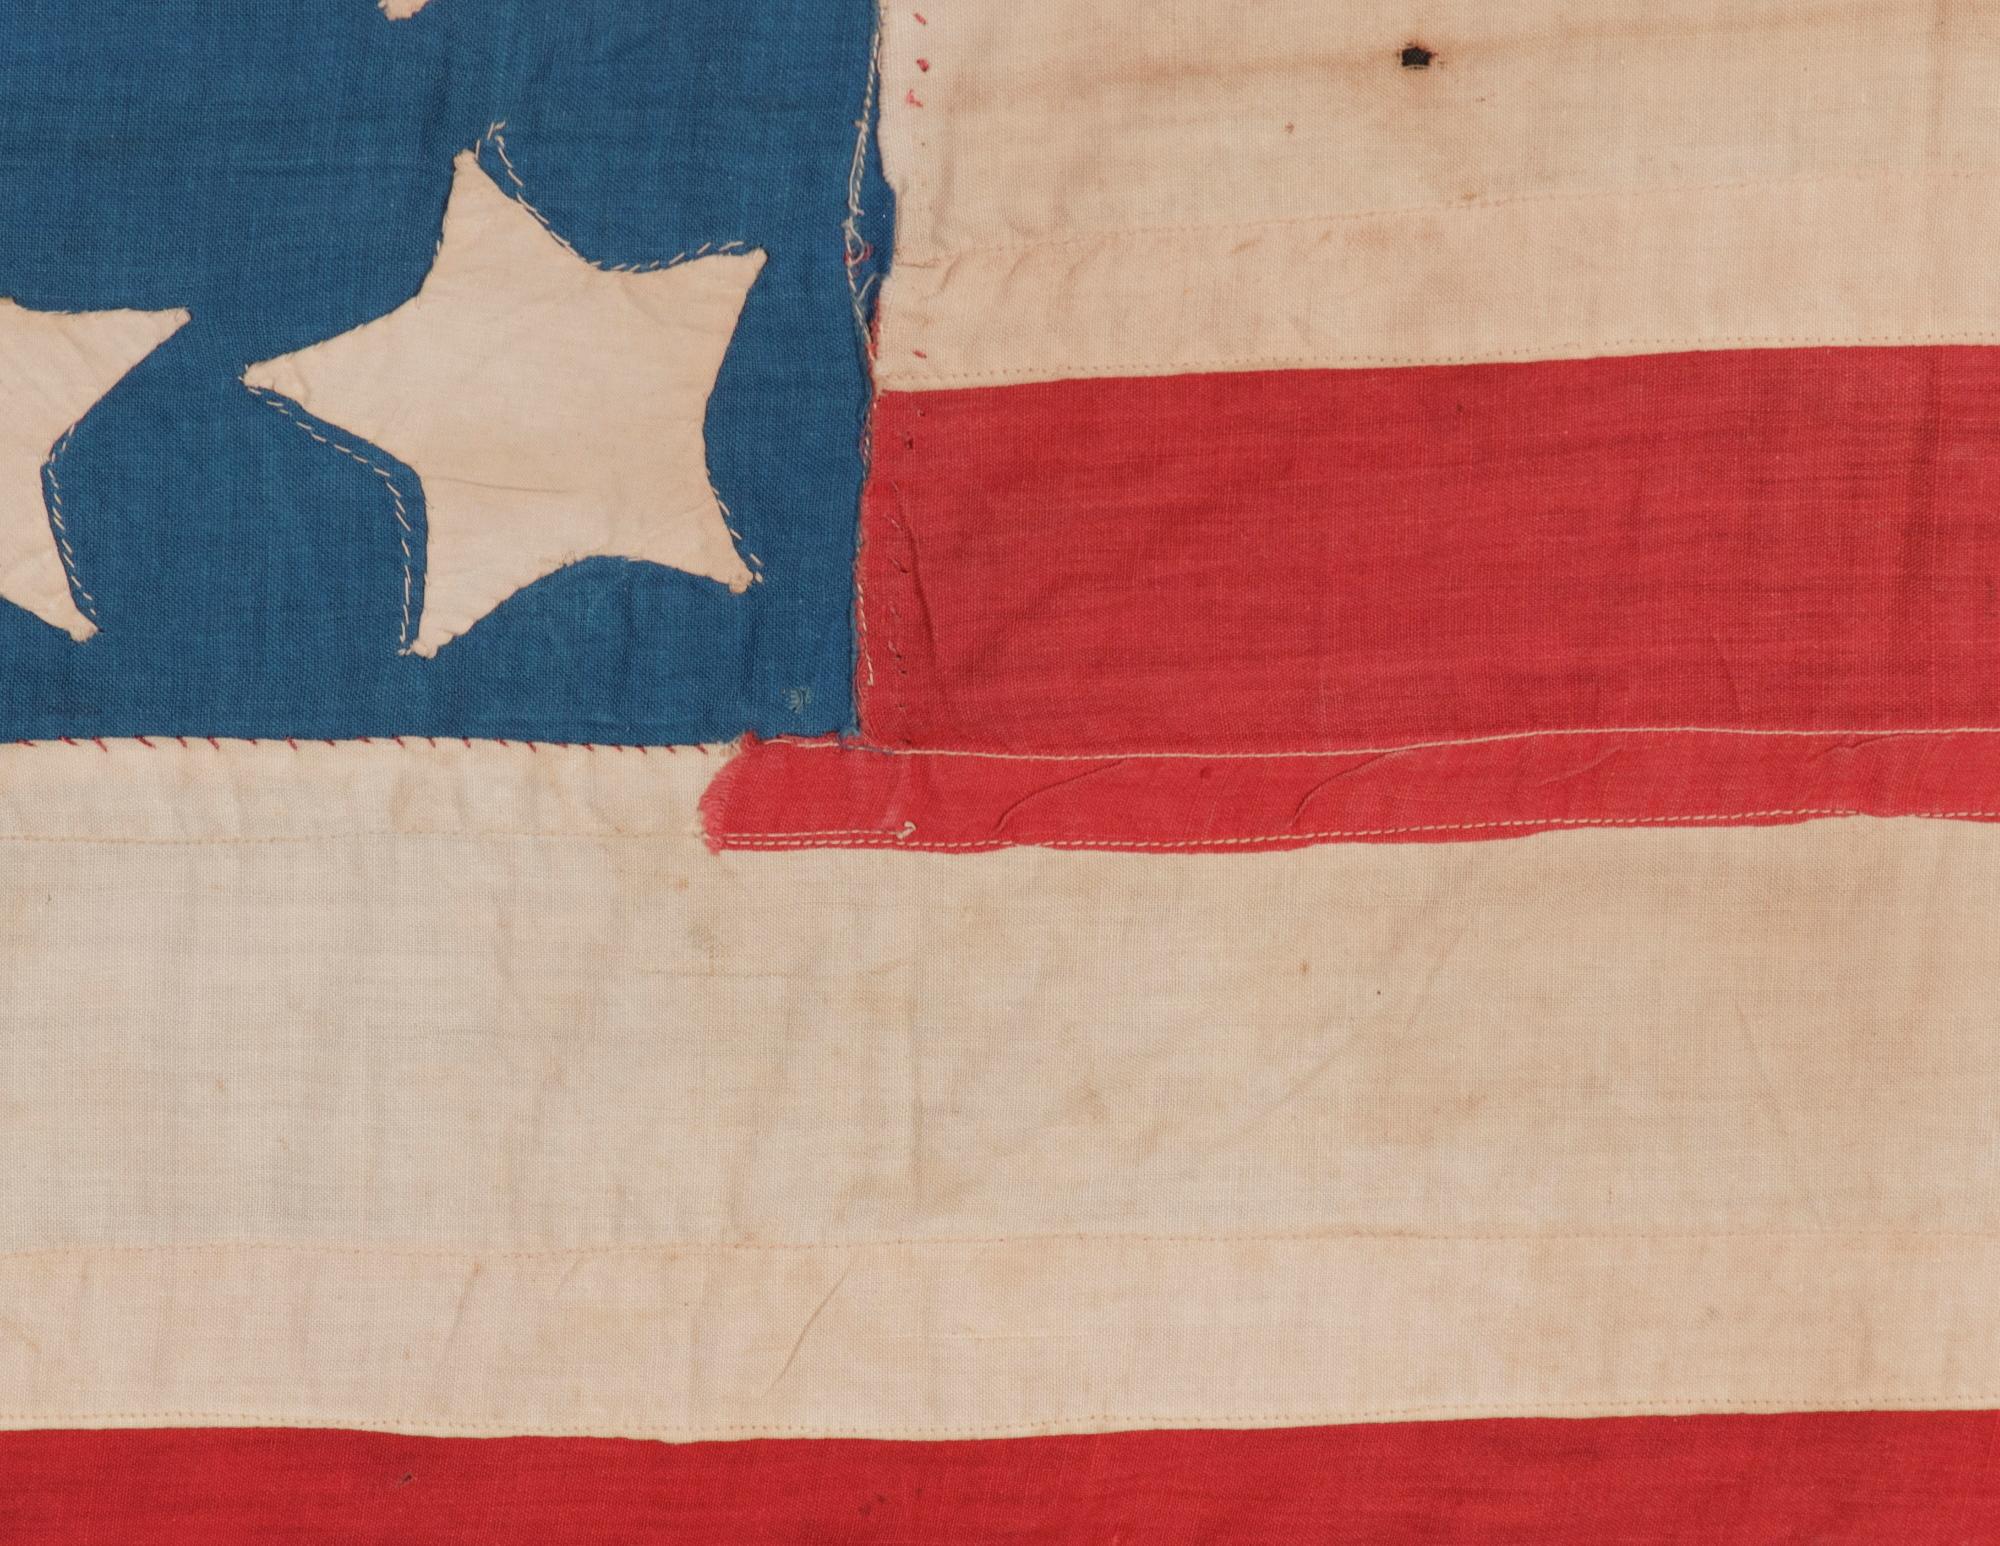 Antique American Flag With 36 Stars On A Cornflower Blue Canton, Civil War Era, 1864-1867, Reflects The Addition Of Nevada As The 36th State; A Great Folk Exaple With Haphazard Rows Of Starfish-like Stars:

36 star American national flag of the